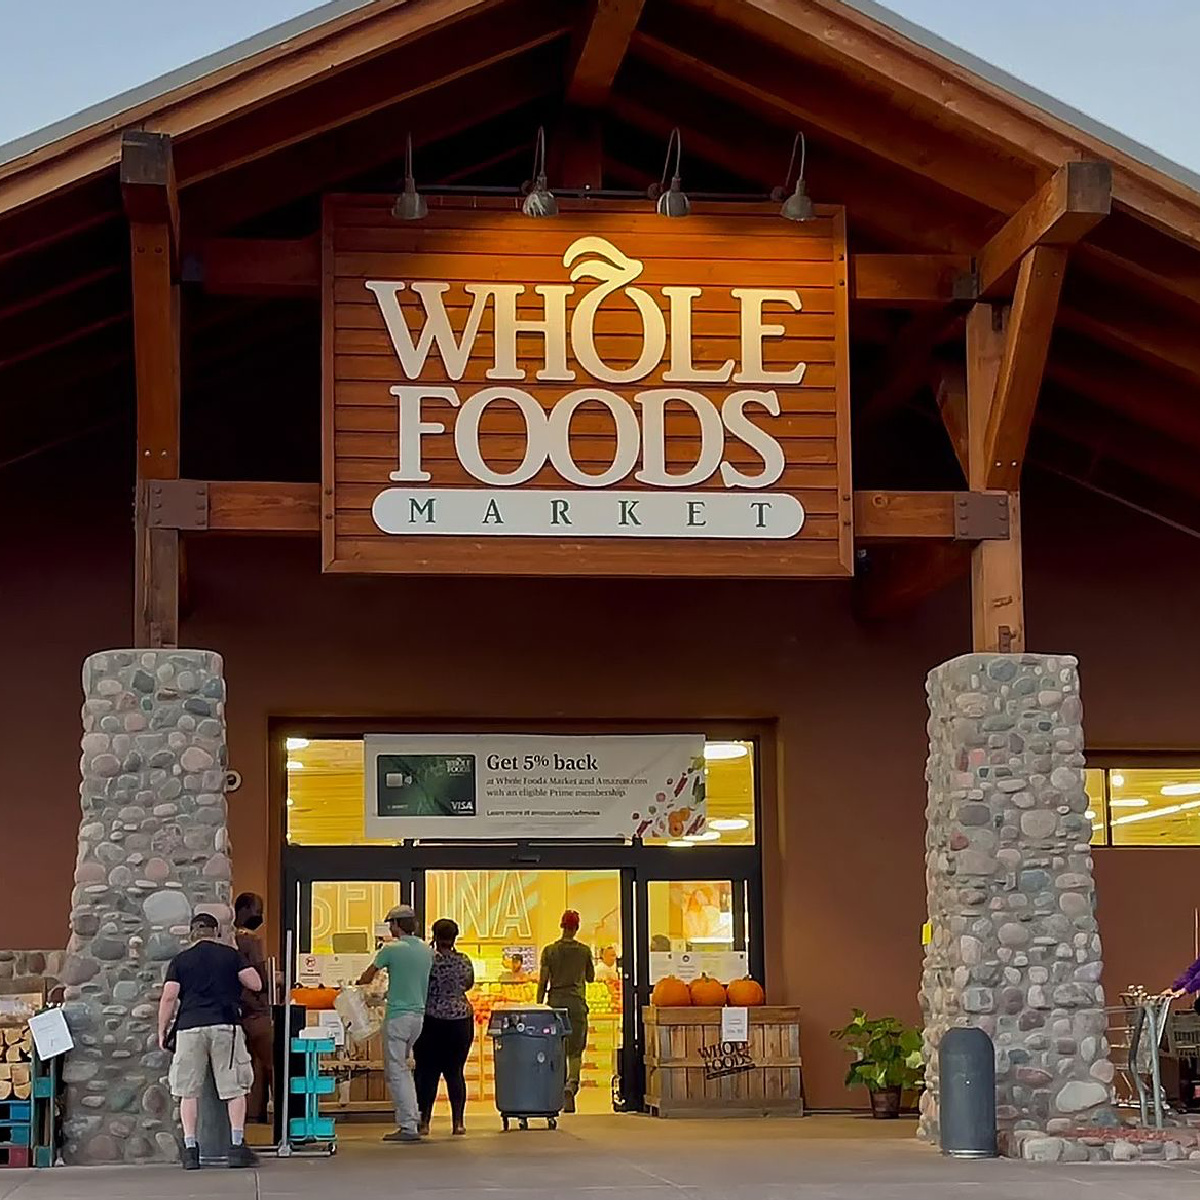 whole foods market outdoor sign stone pillars brown building